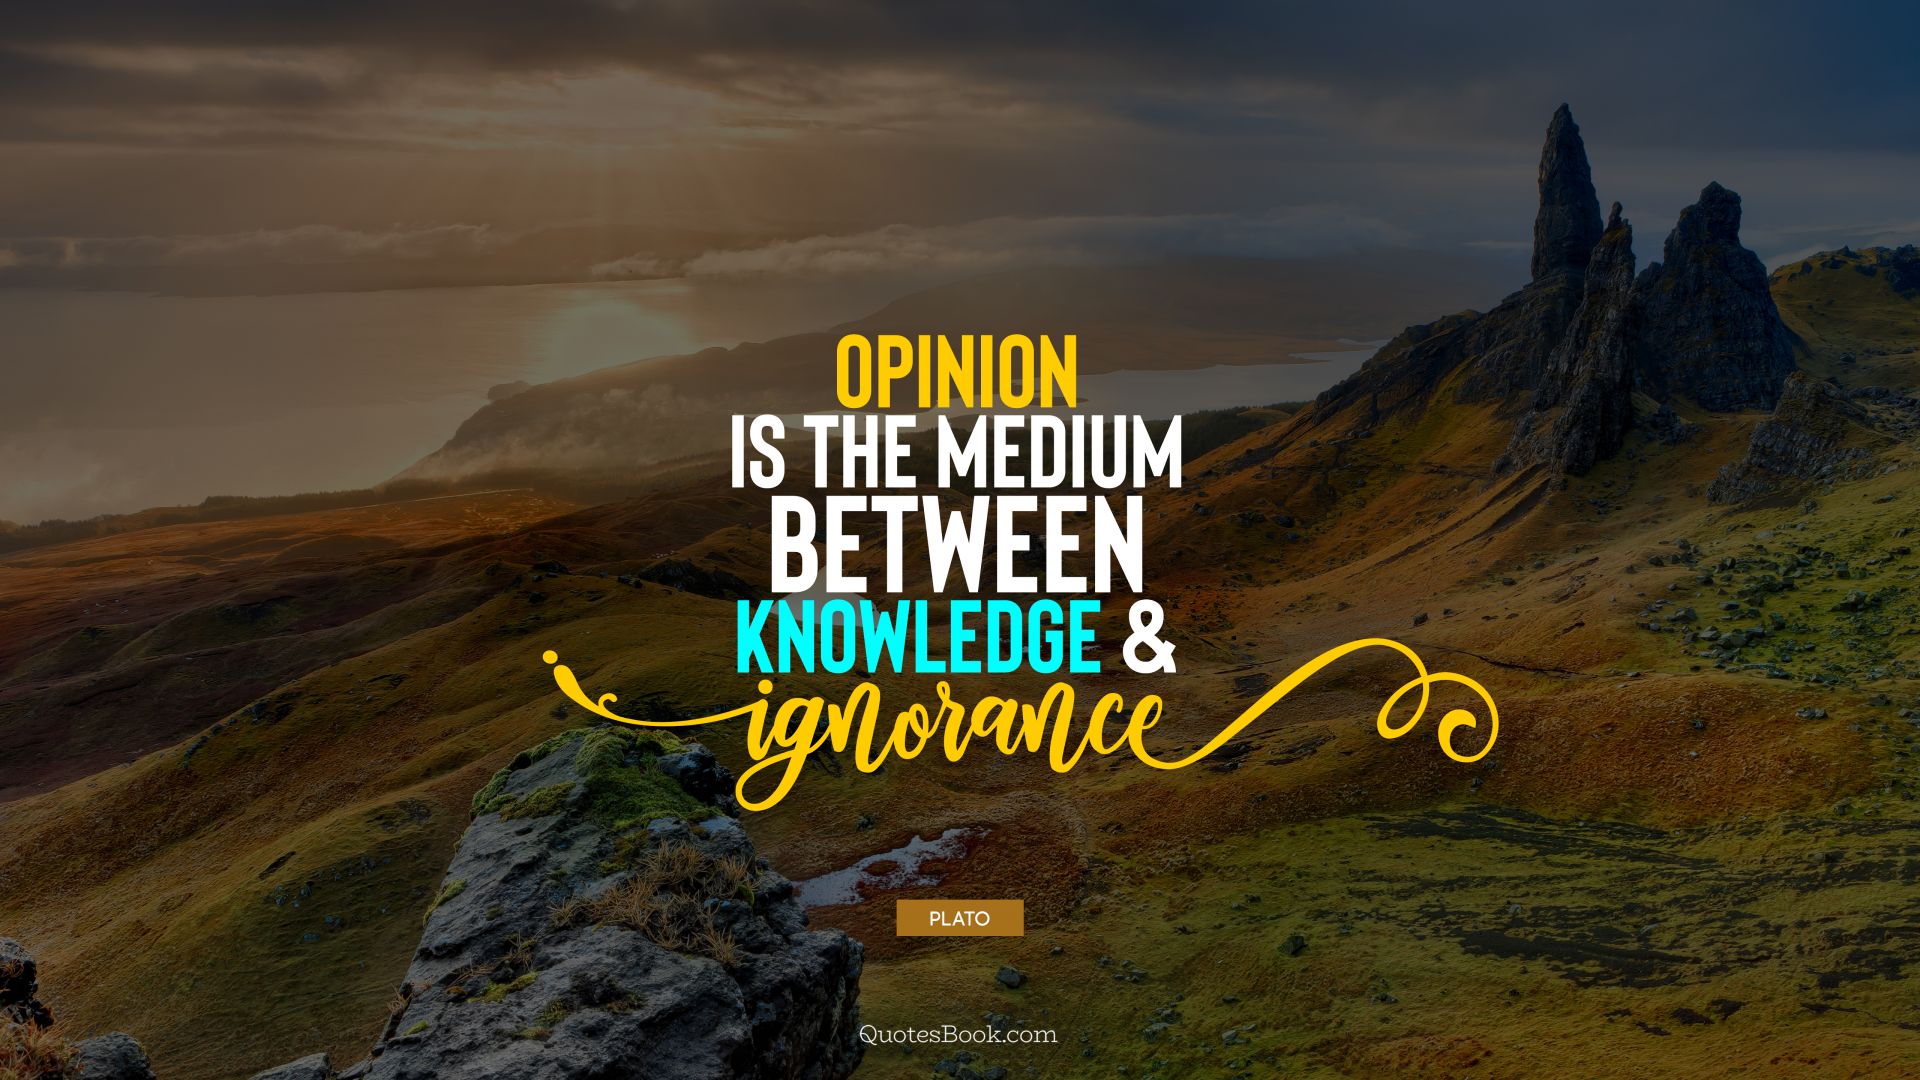 Opinion is the medium between knowledge and ignorance. - Quote by Plato